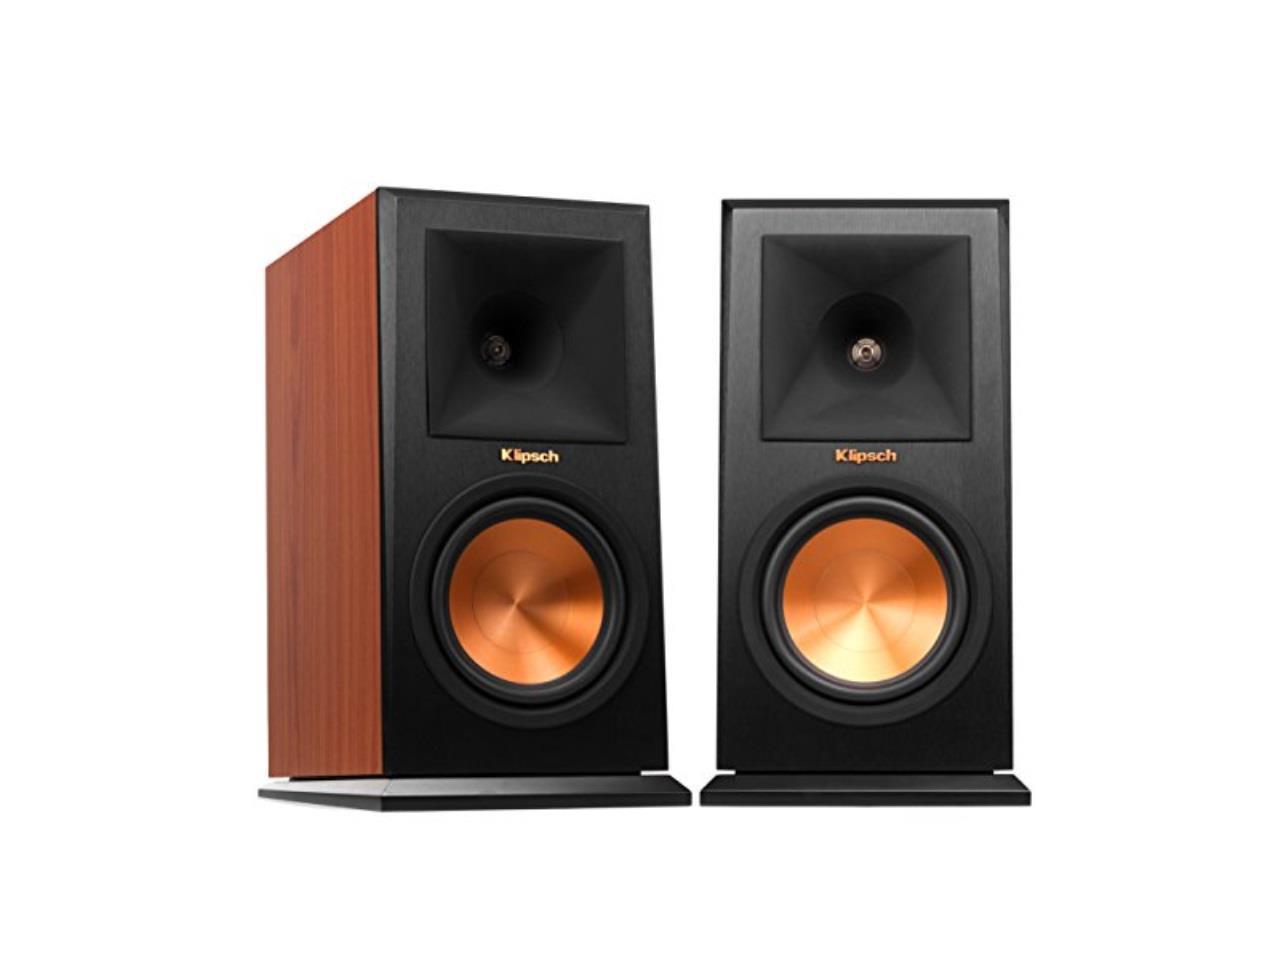 Klipsch RP-160M Reference Premiere Monitor Speakers (pair) $200 + free s/h